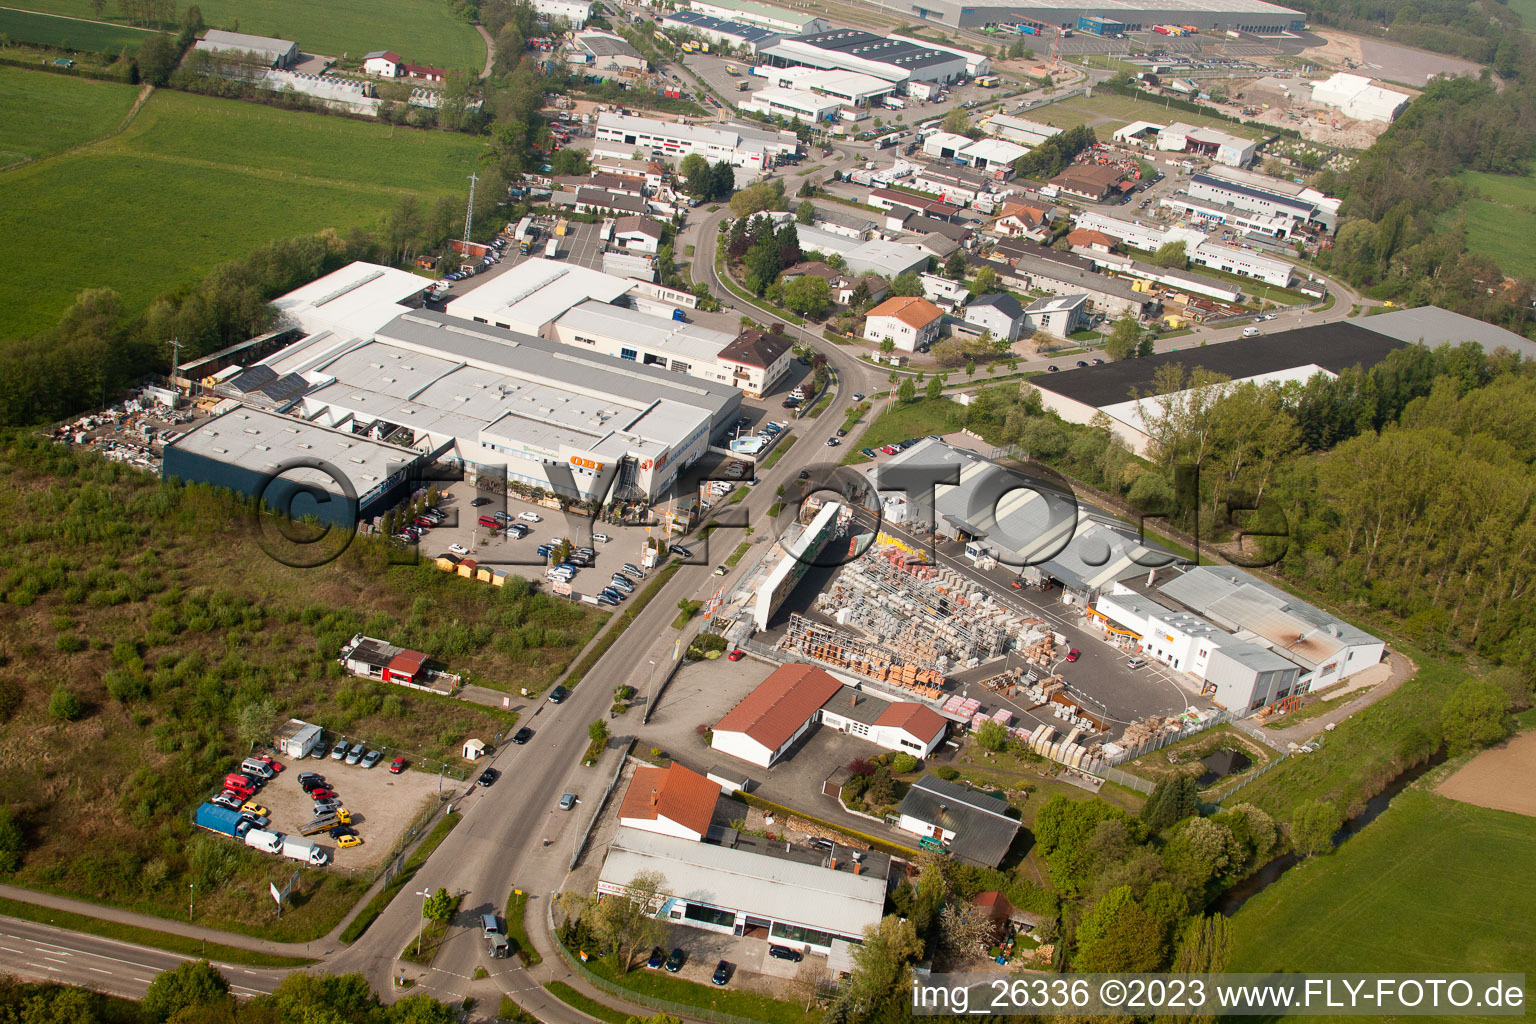 Aerial view of Minderlachen, UNION building materials trade in the district Minderslachen in Kandel in the state Rhineland-Palatinate, Germany